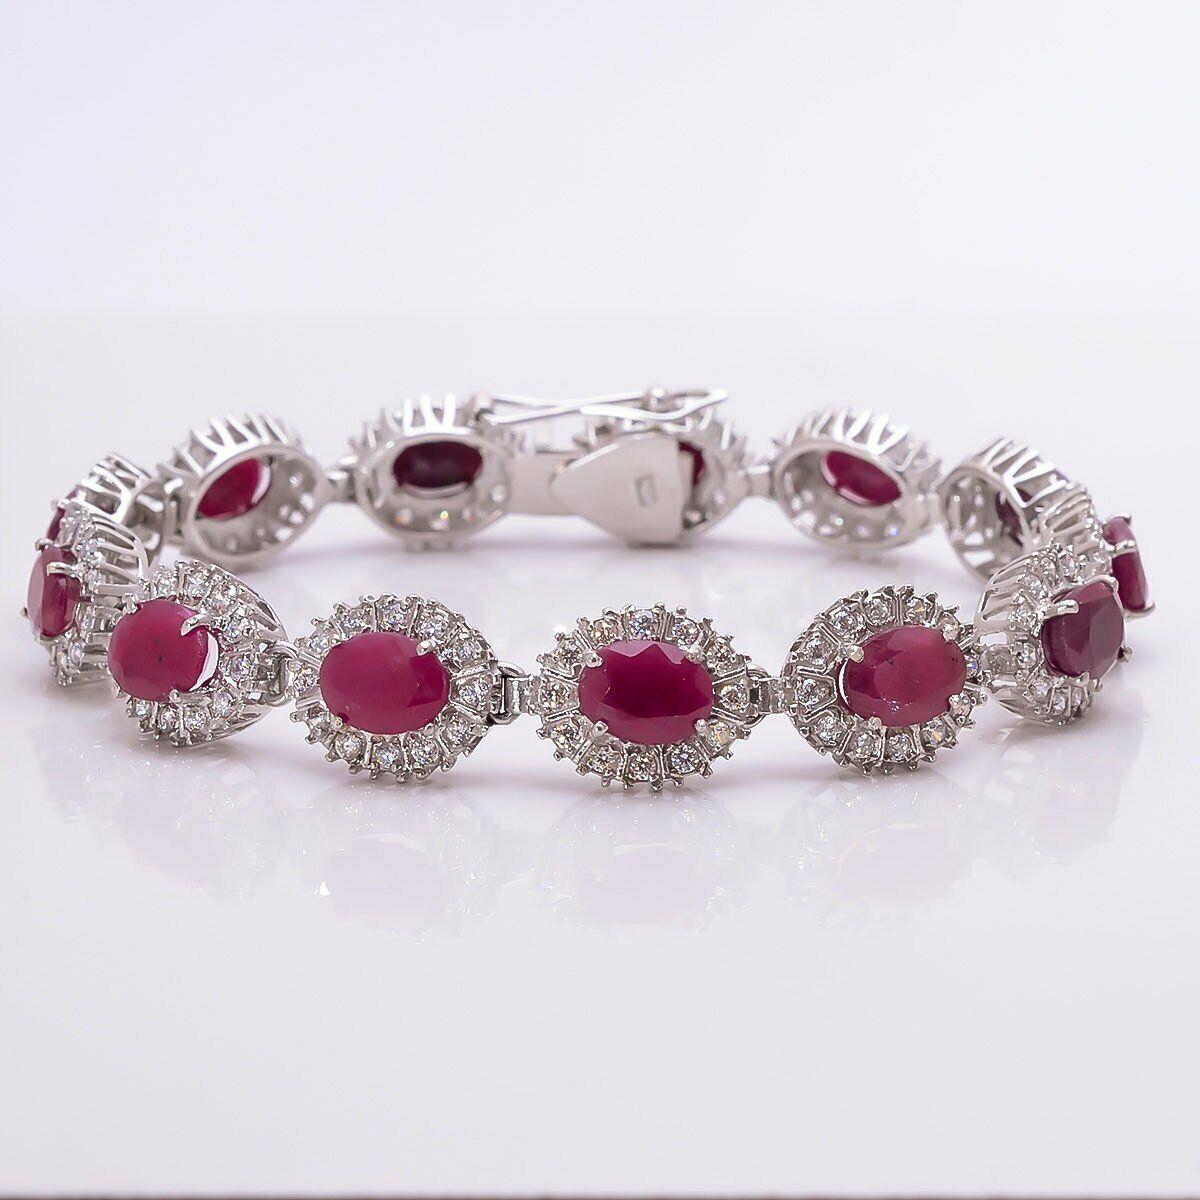 Lab-Created Ruby Bracelet Diamond Accents Sterling Silver | Kay Outlet